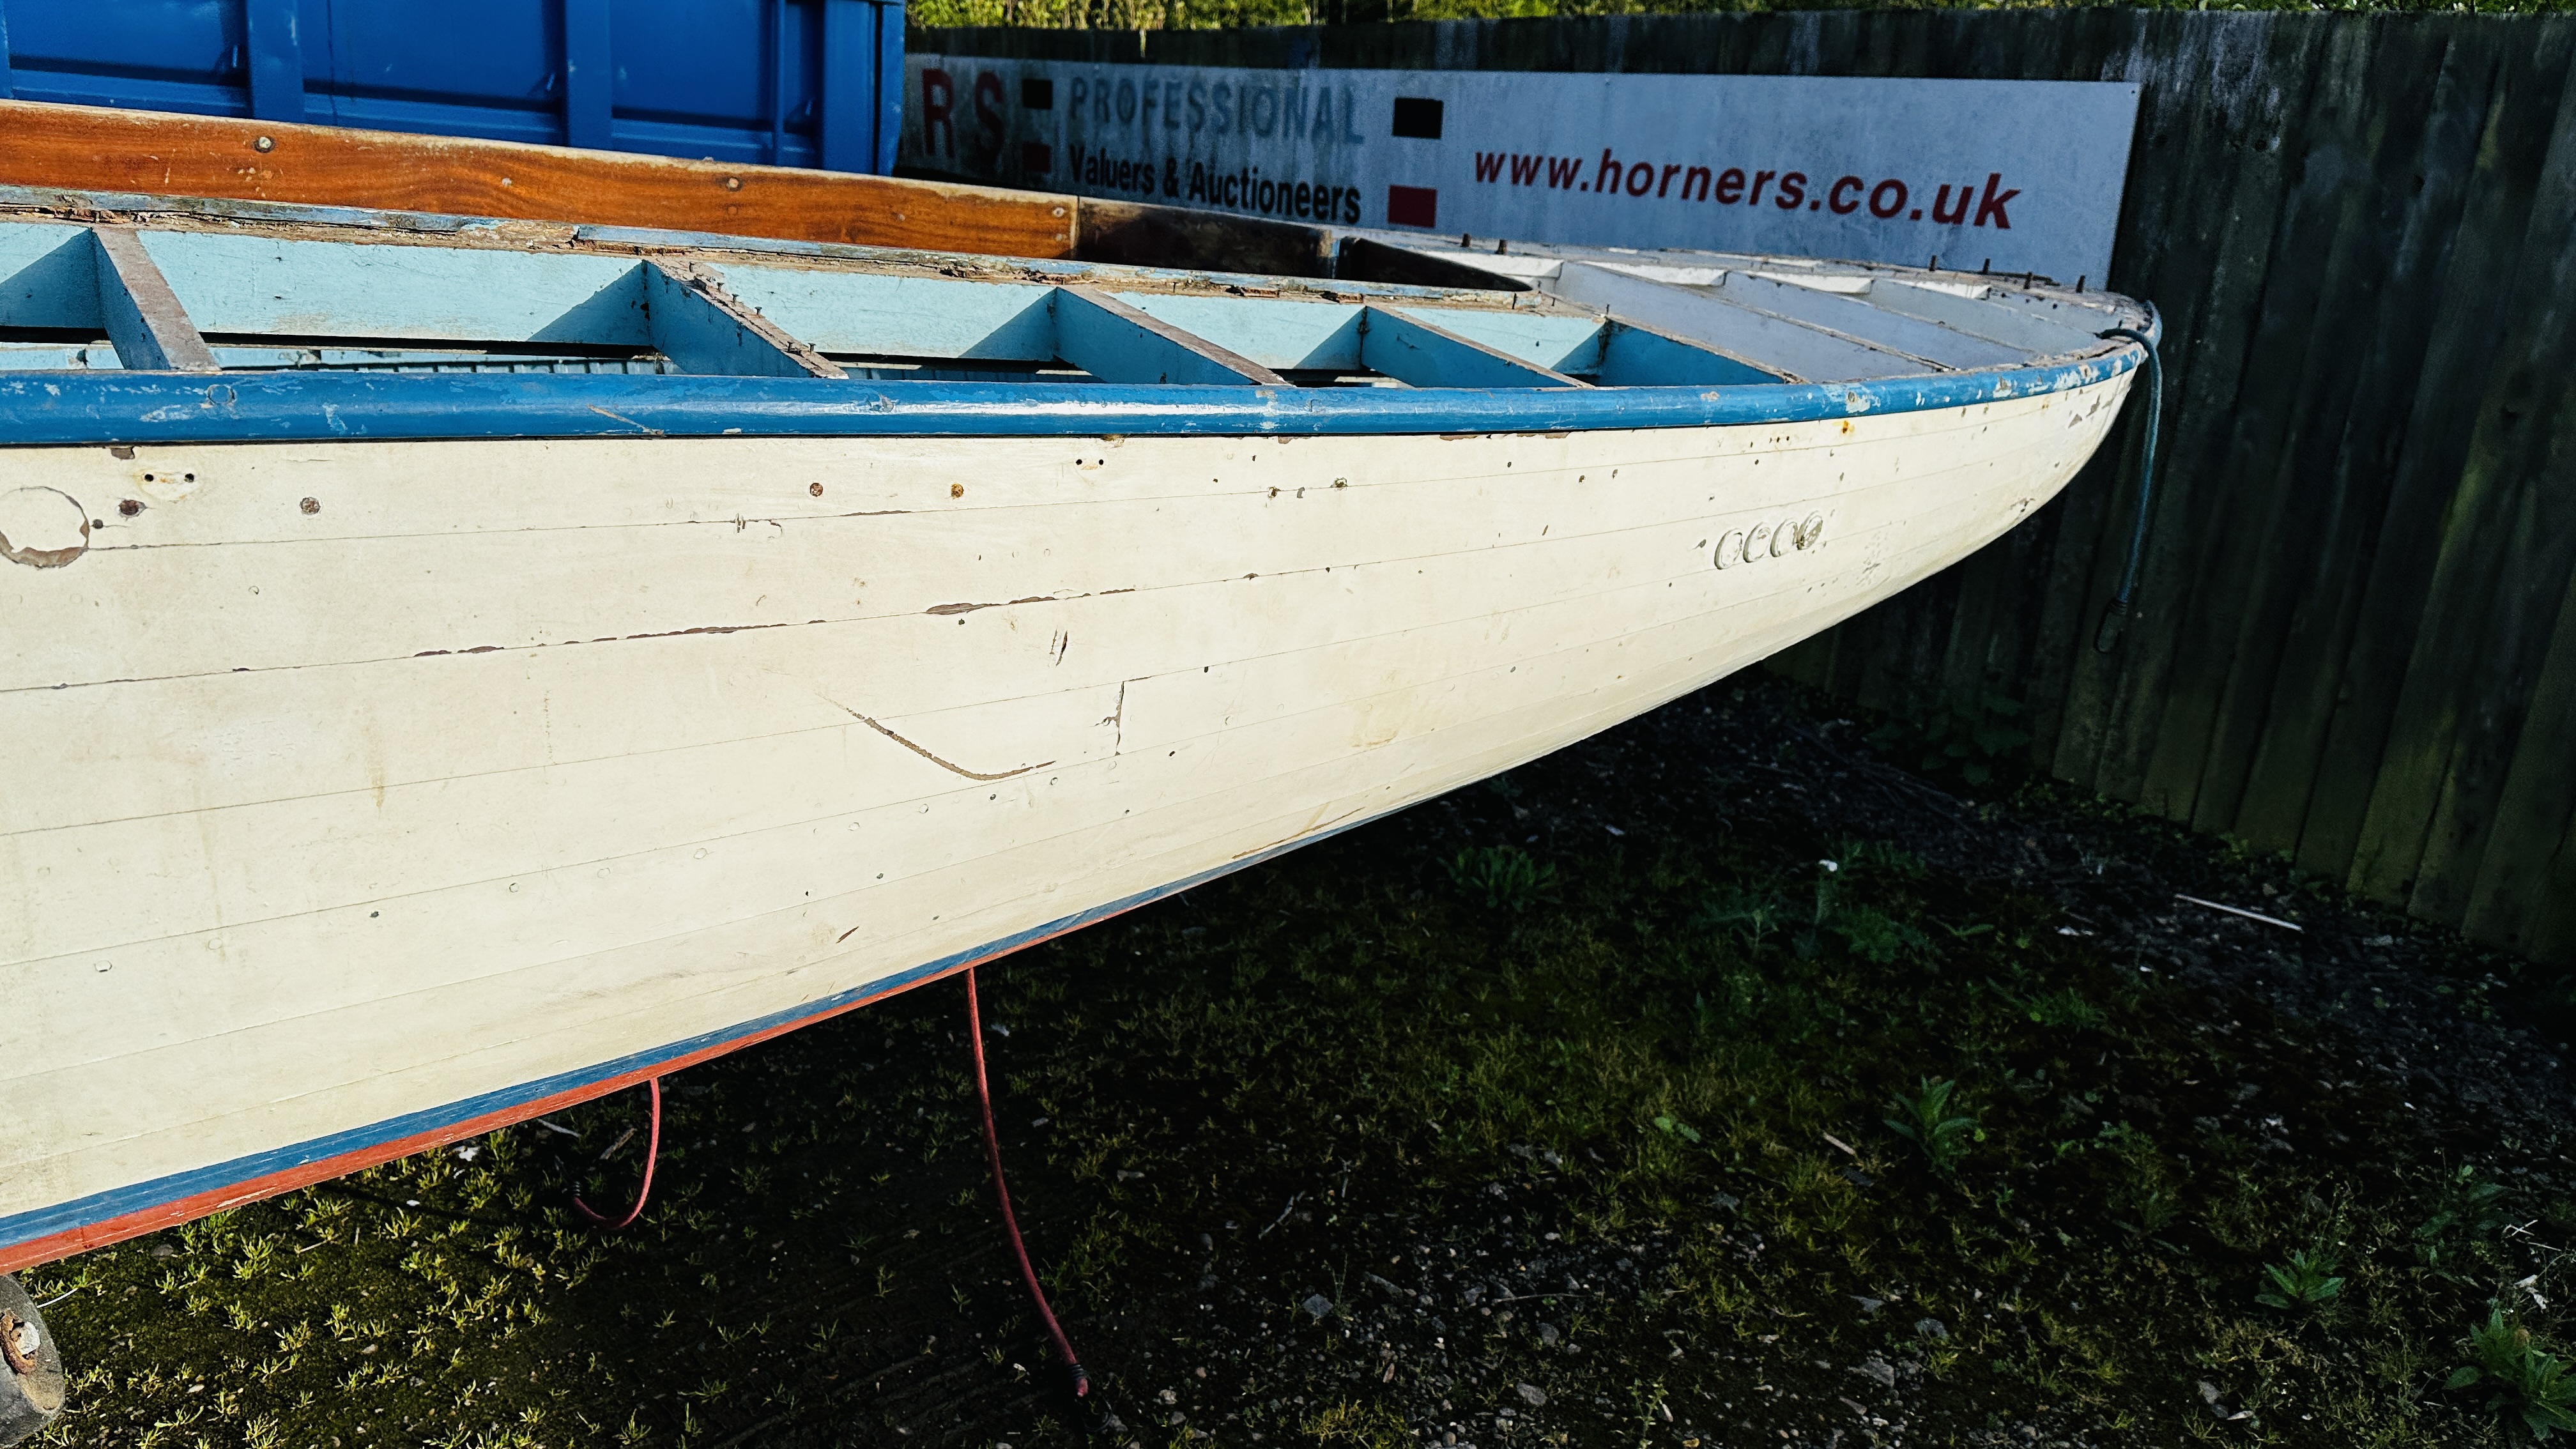 A WW2 UFFA FOX RESCUE BOAT BELIEVED TO BE BUILT BY TAYLOR WOODROW, STAMPED AW11, 1 OF 402 MADE, - Image 37 of 56